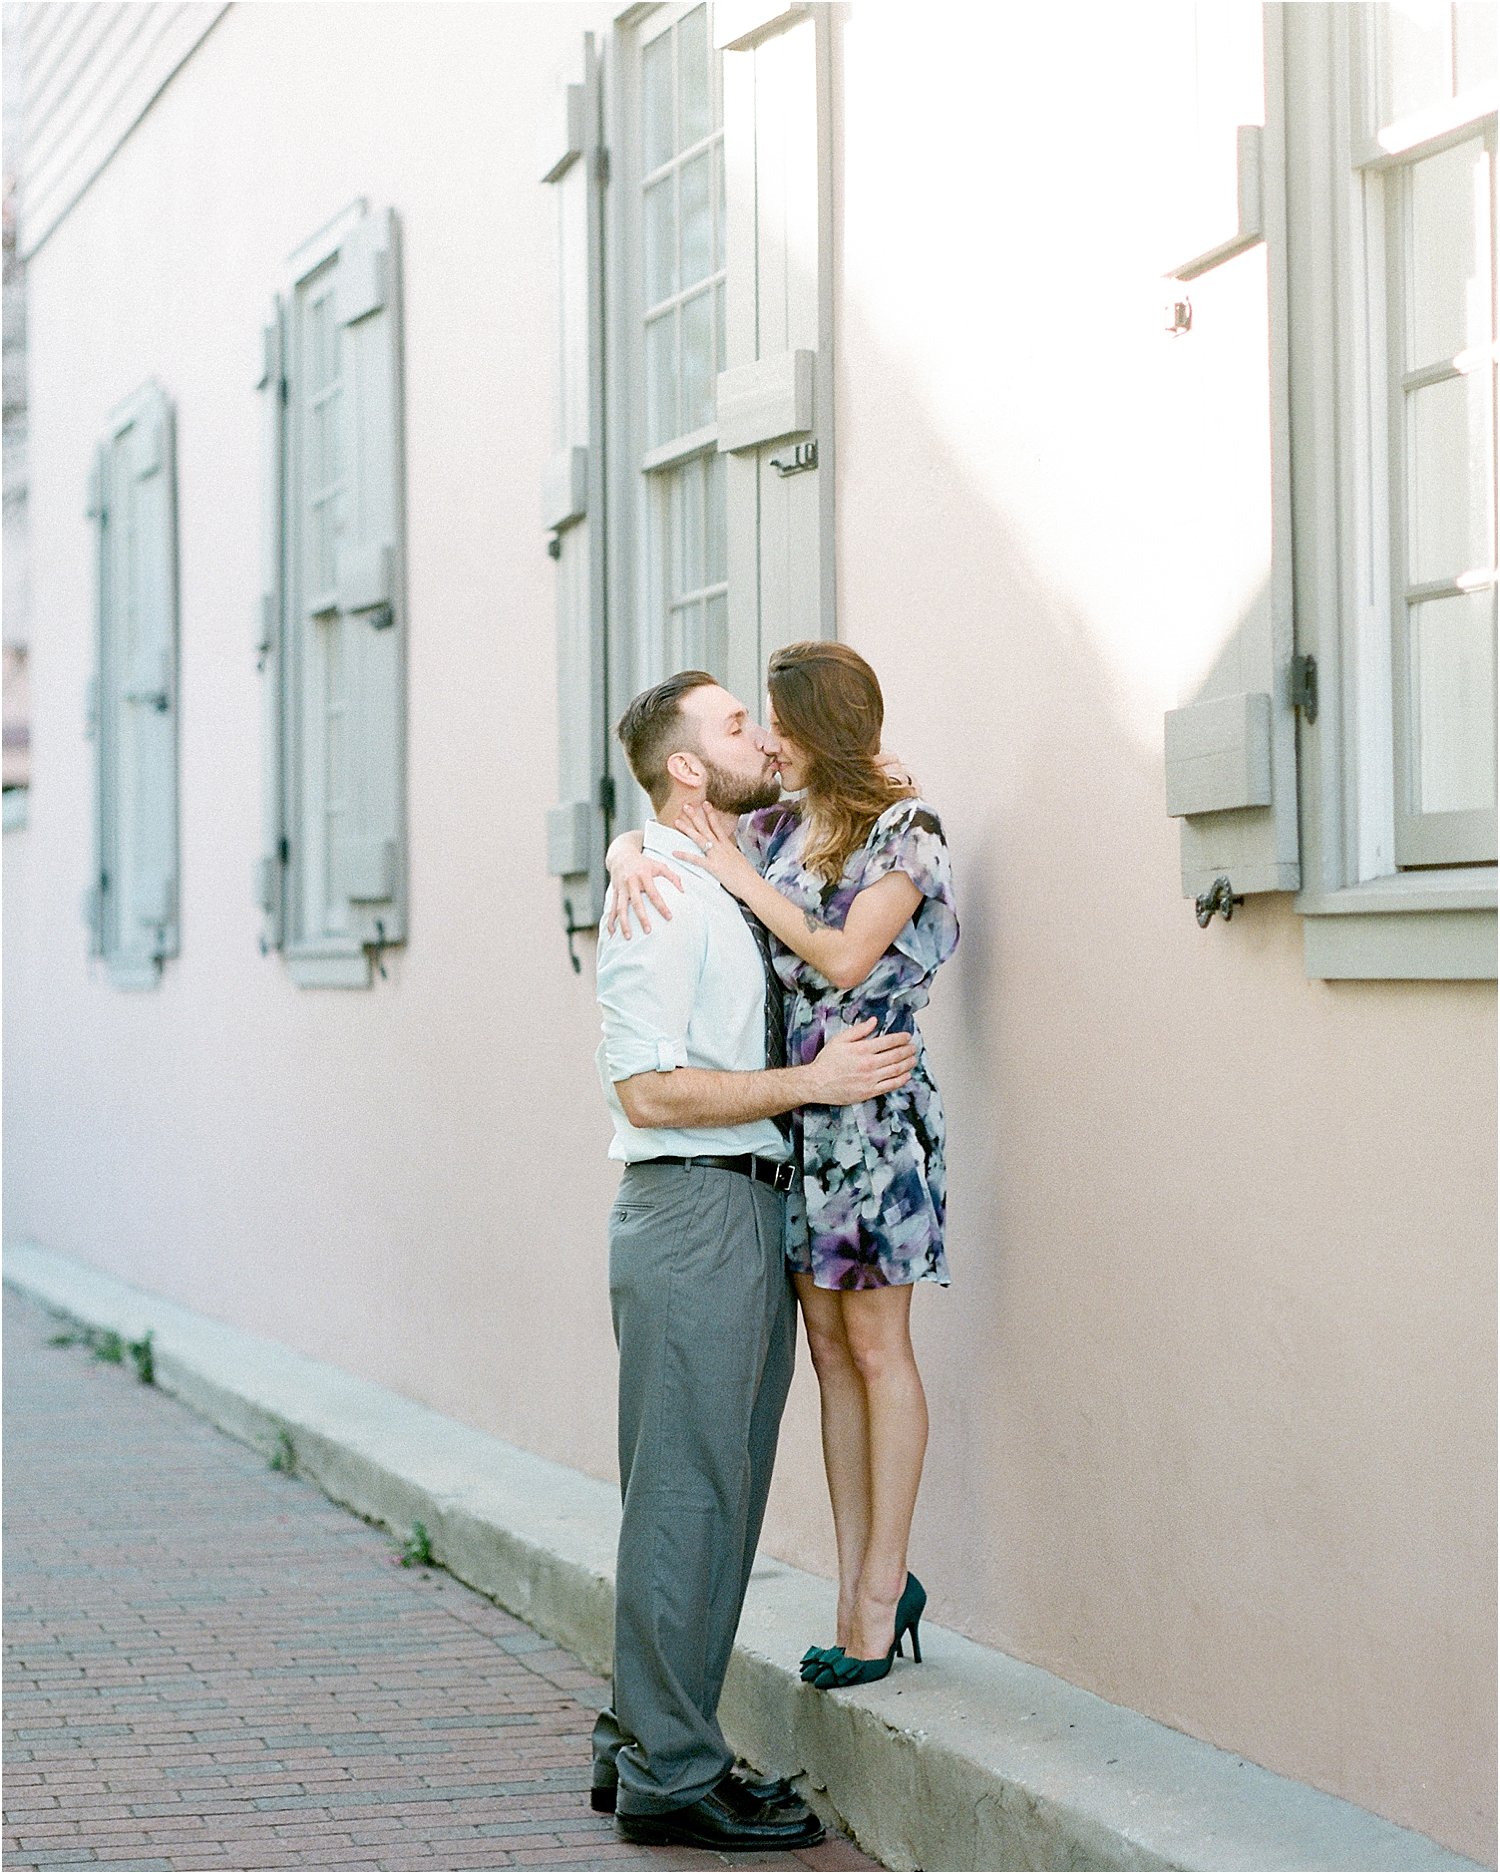 Adina and Eric- Engagement Session in St. Augustine, Florida- Jacksonville, Ponte Vedra Beach, St. Augustine, Amelia Island, Florida and Destination Fine Art Film Wedding Photography_0005.jpg